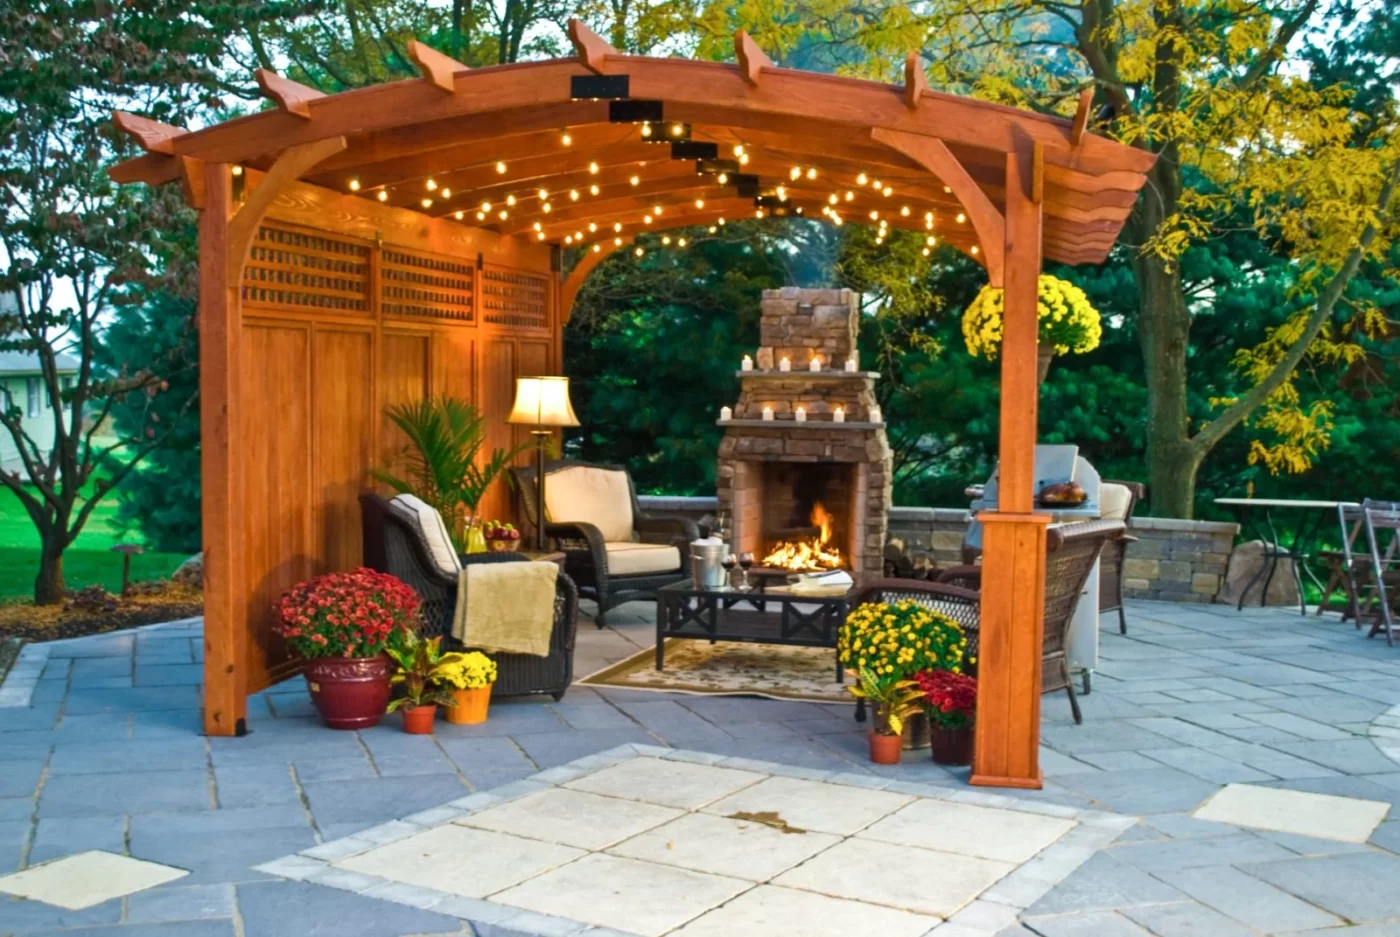 12x17 pergola with curved roof for sale in mt, wy, ut